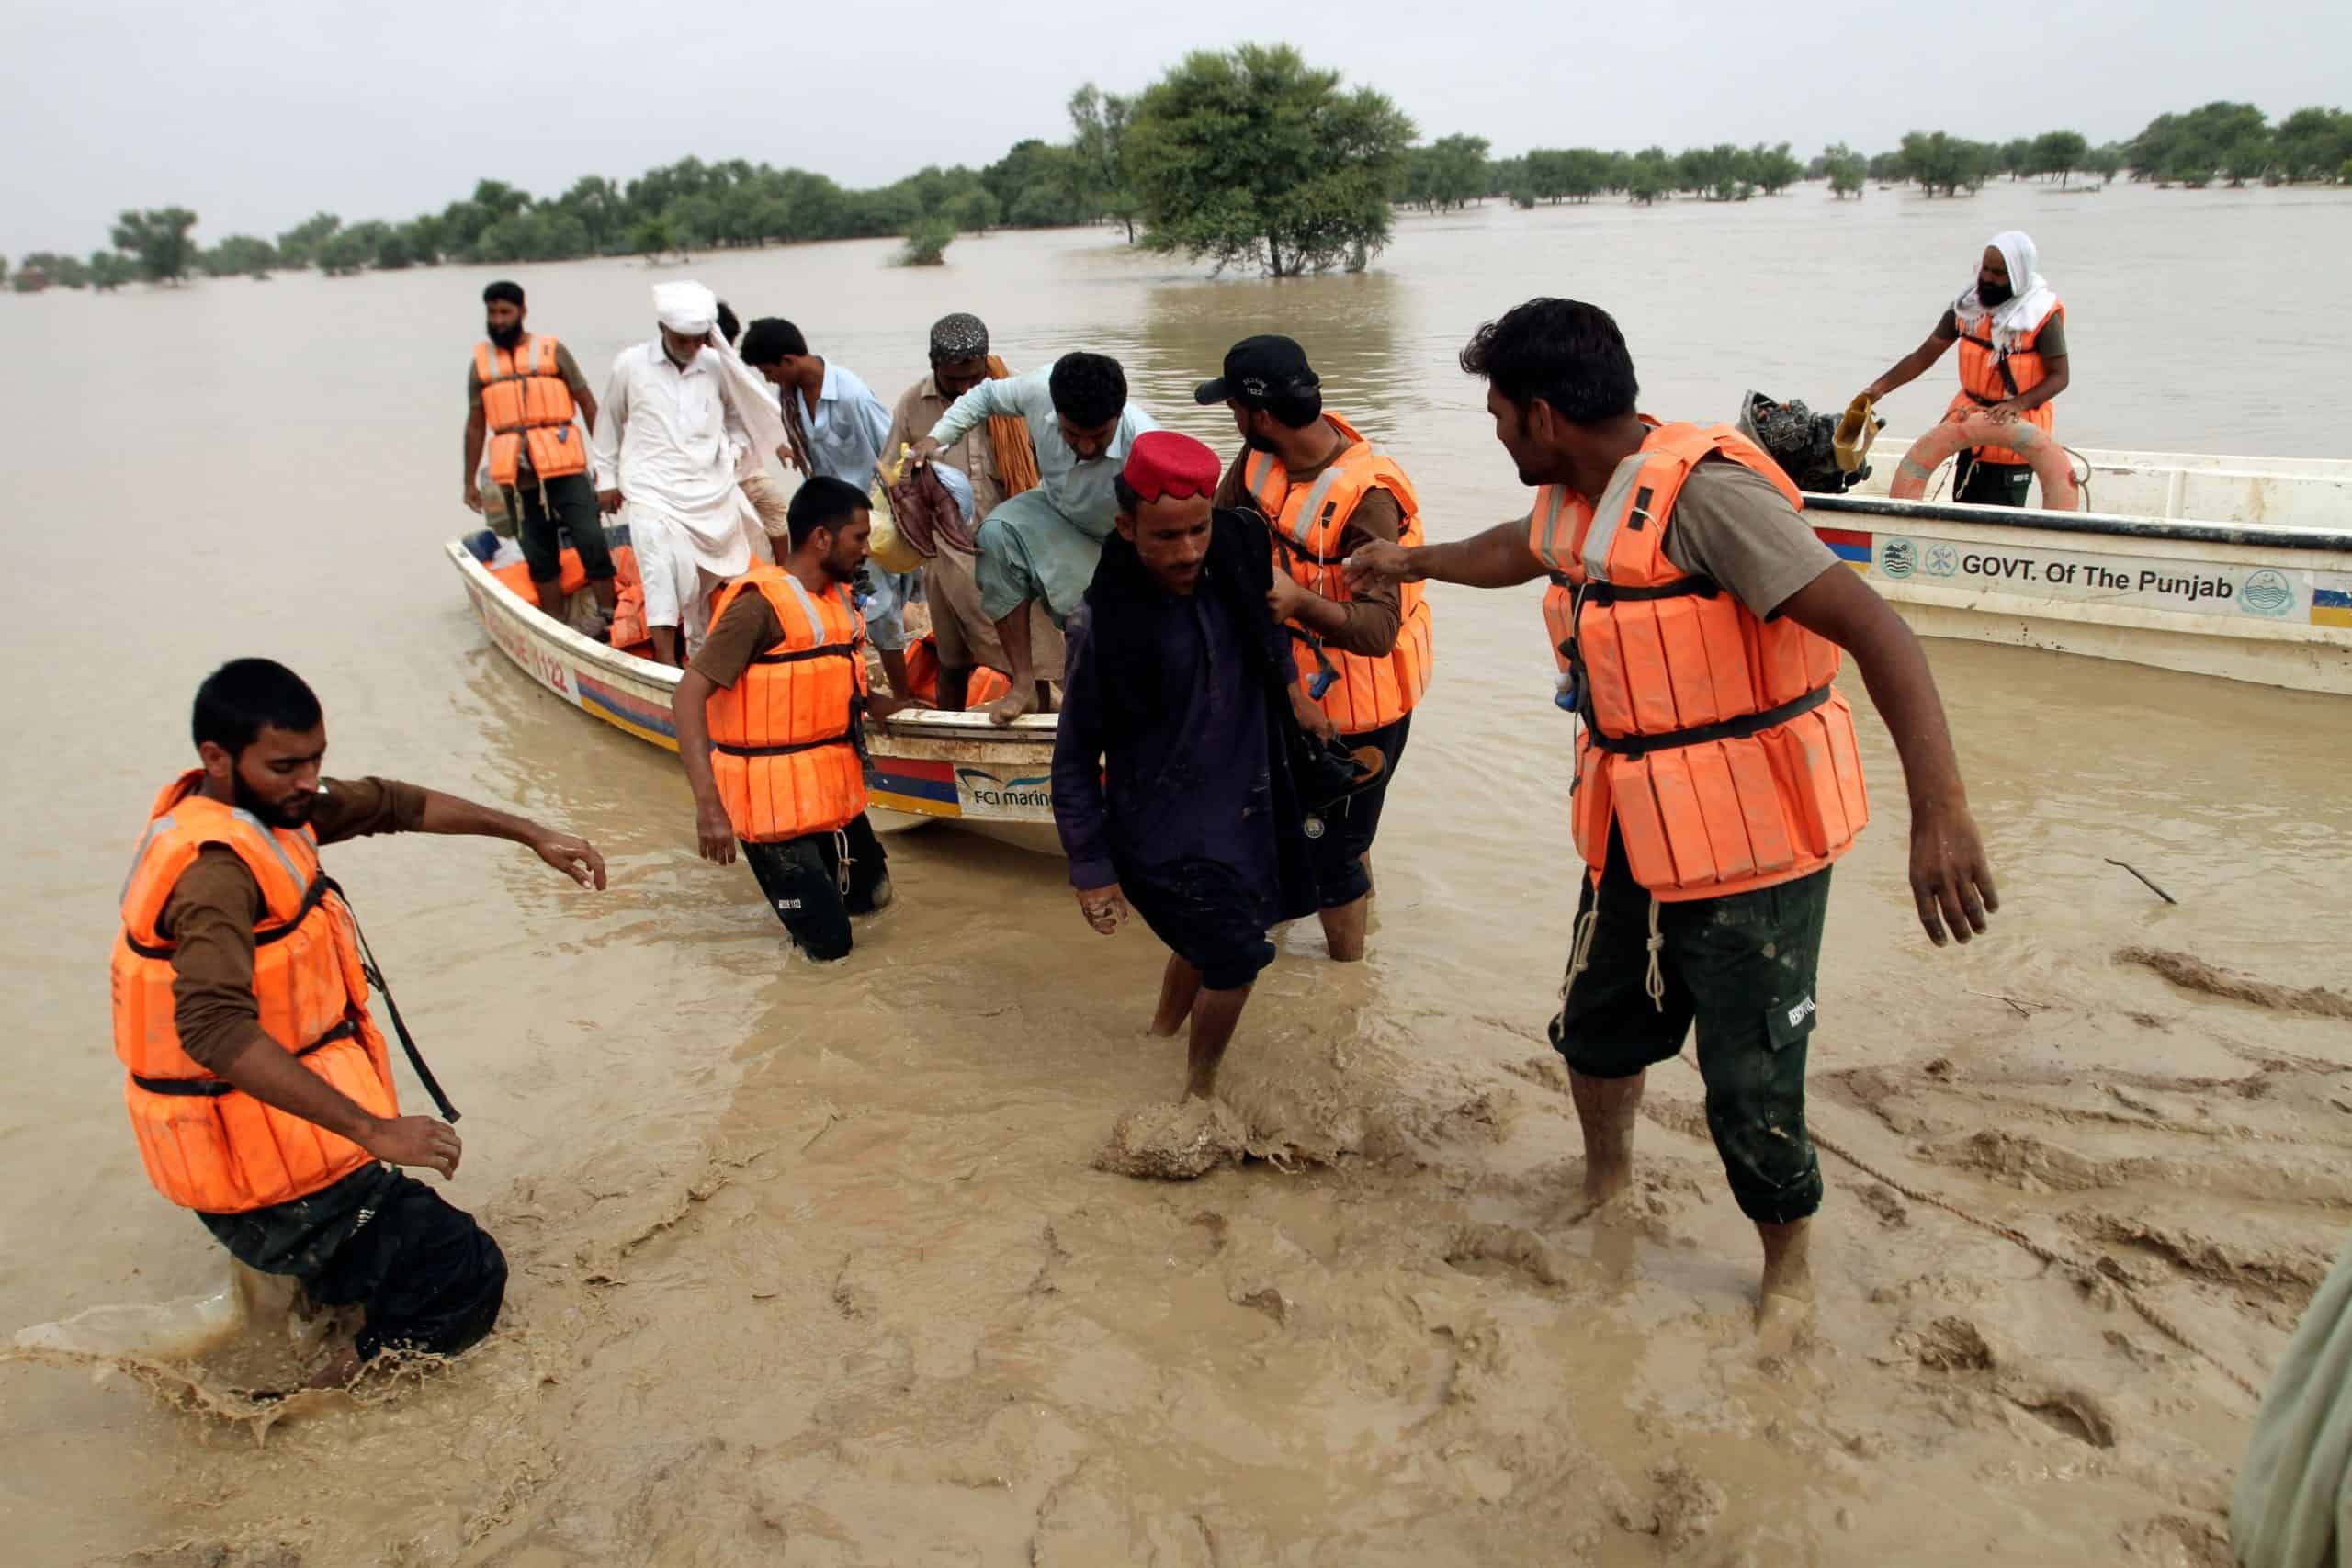 Pakistan flooding deaths pass 1,000 in ‘climate catastrophe’